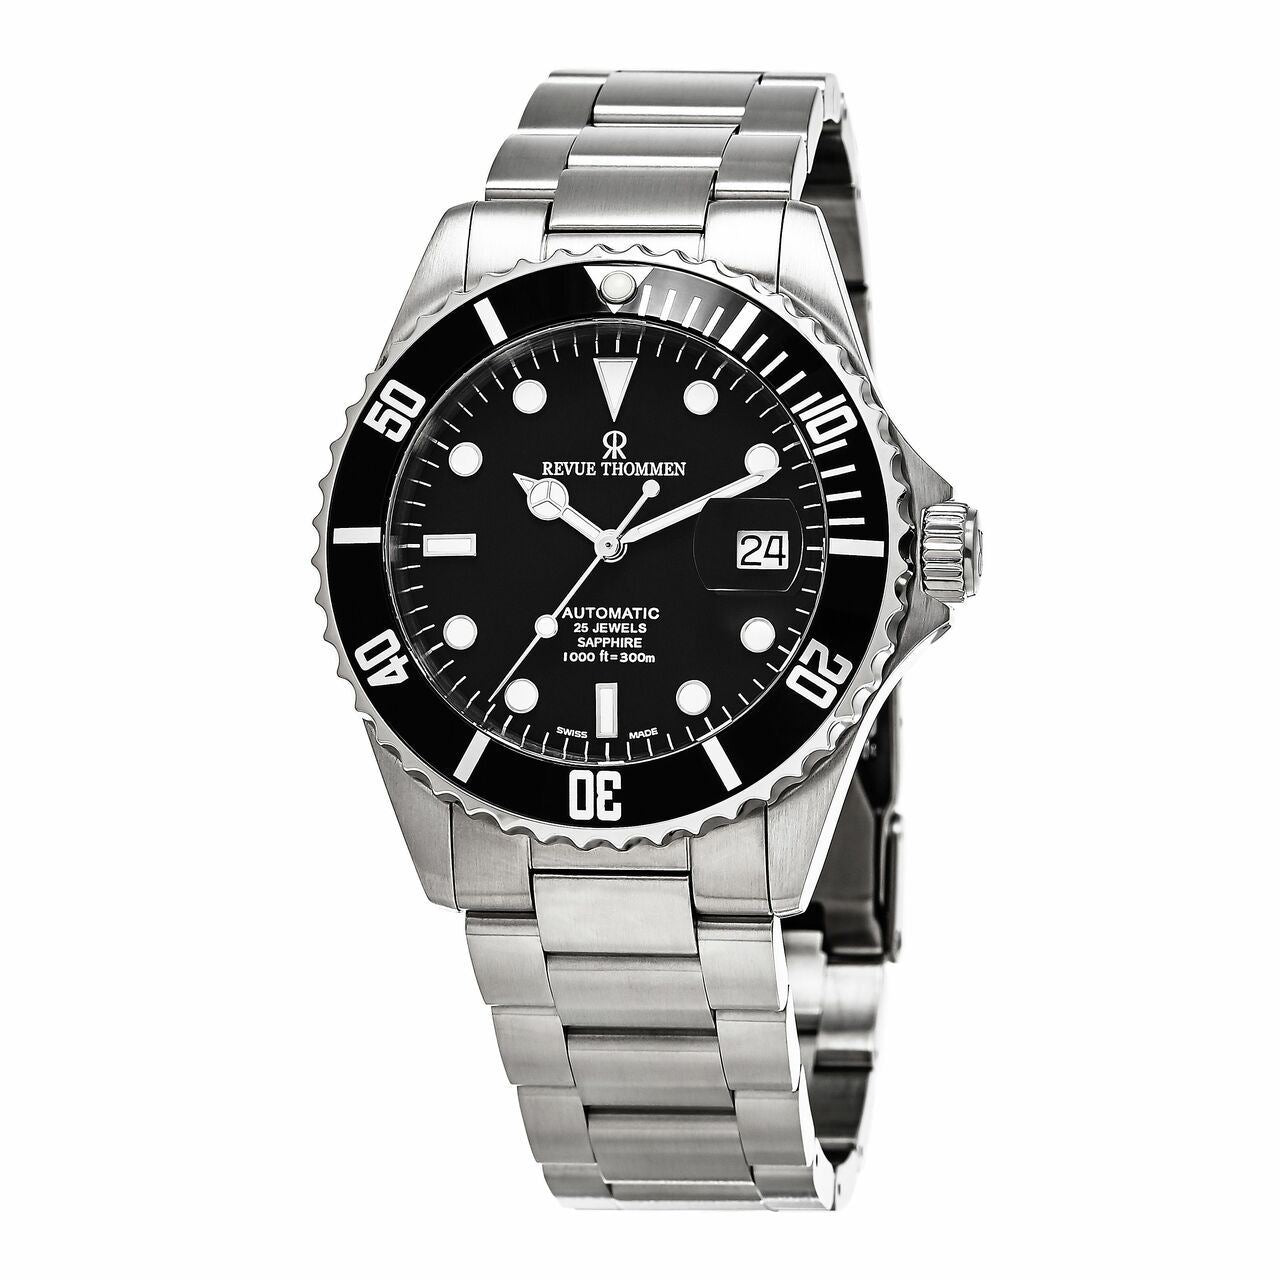 A Revue Thommen 17571.2137 Diver Stainless Black Dial Men's Automatic Watch with a black dial.